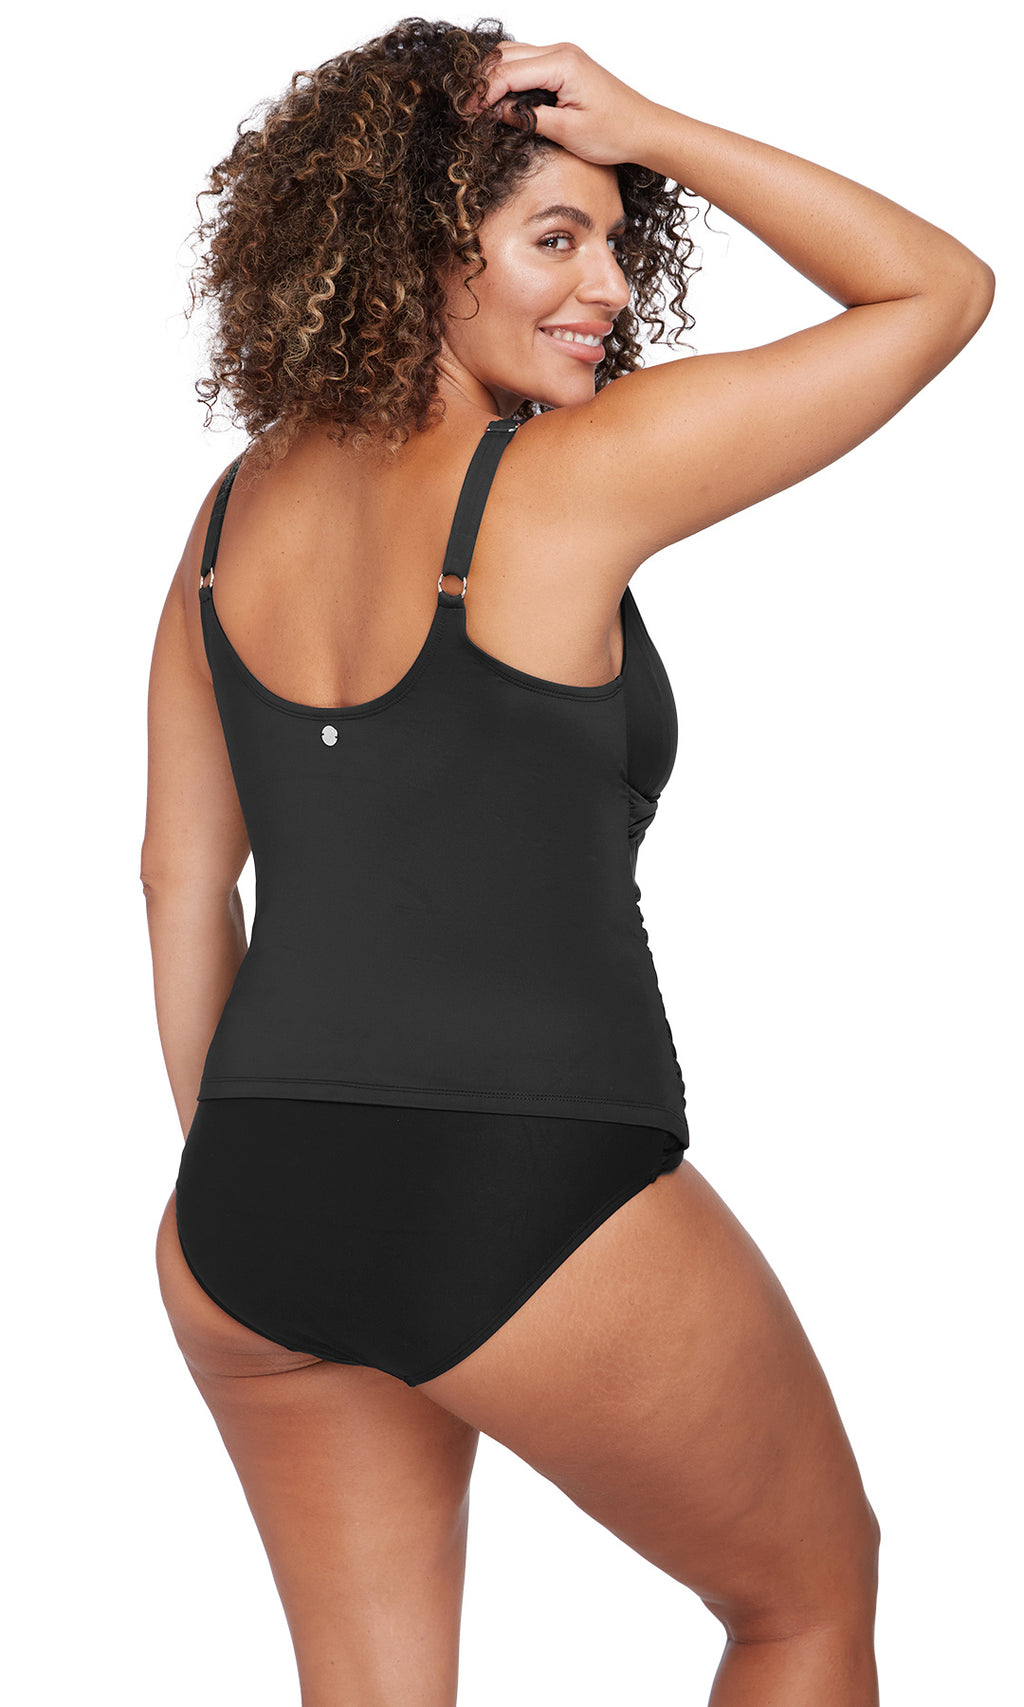 Cross Front Tankini Top Hues Black Delacroix, Multifit D Cup to G cup